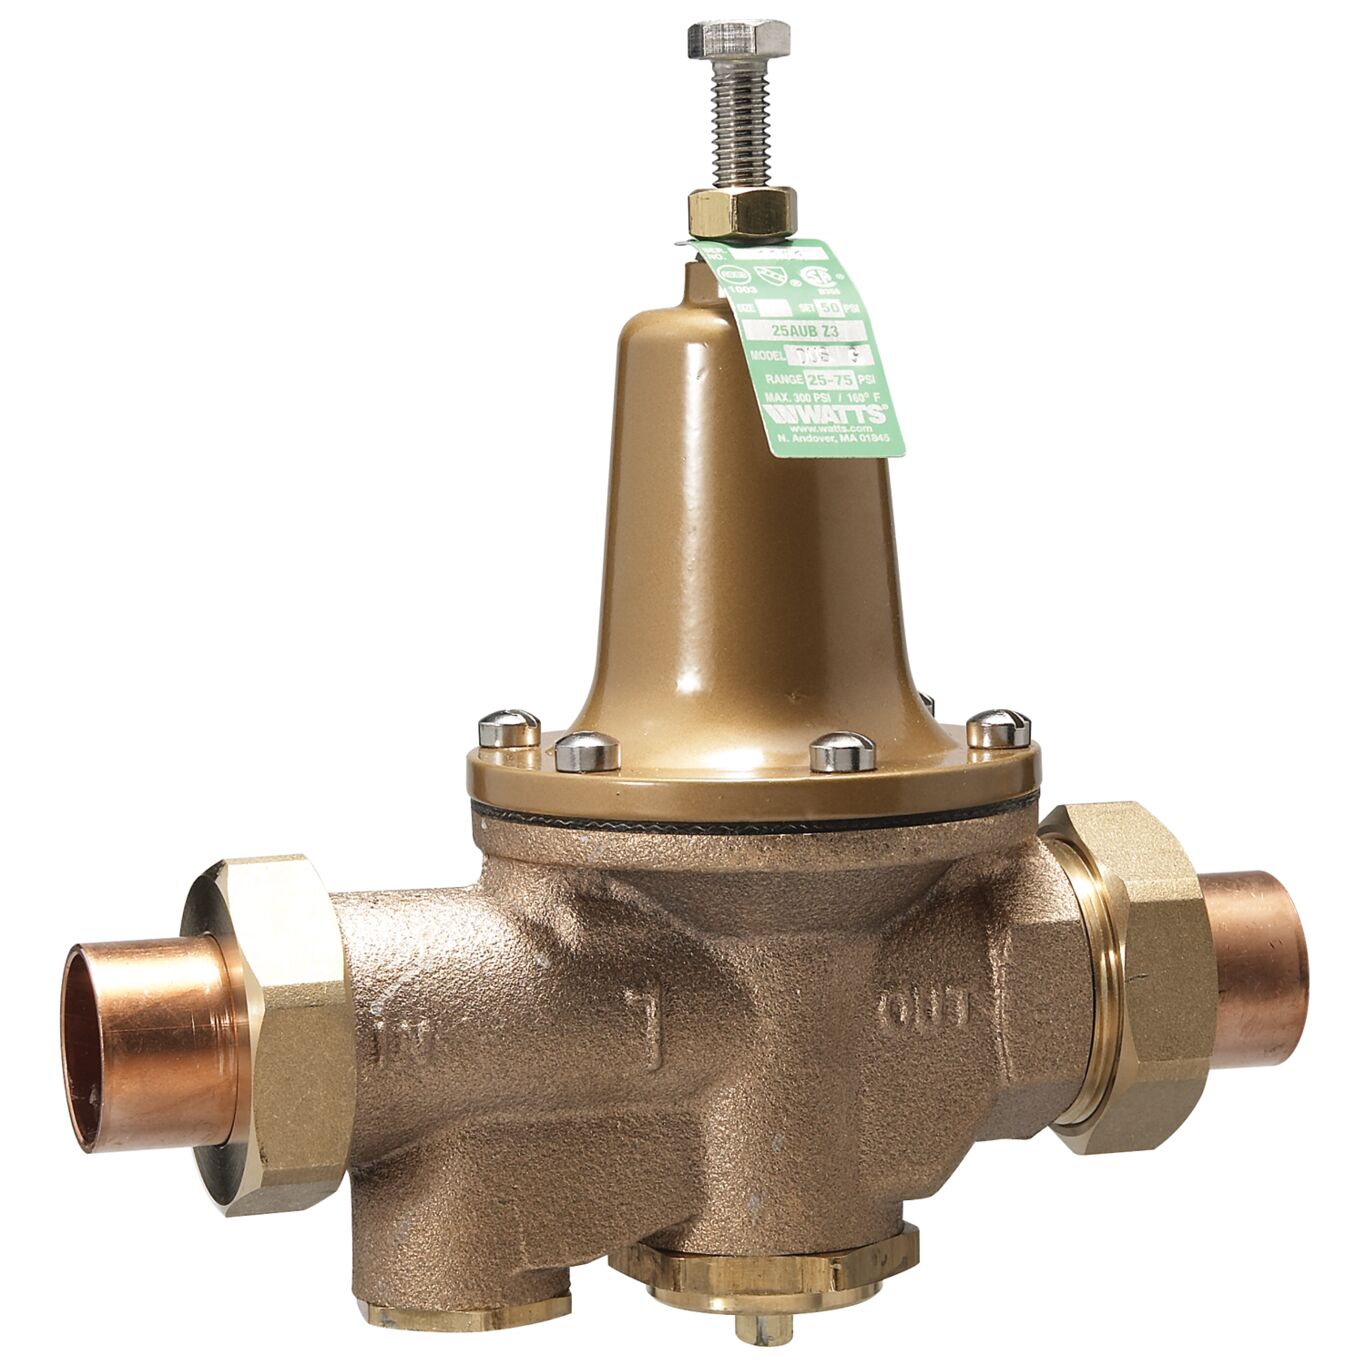 NEW WATTS Water Pressure Reducing Valve 25AUB-Z3 3/4" Brass FPT x FPT 50PSI. 